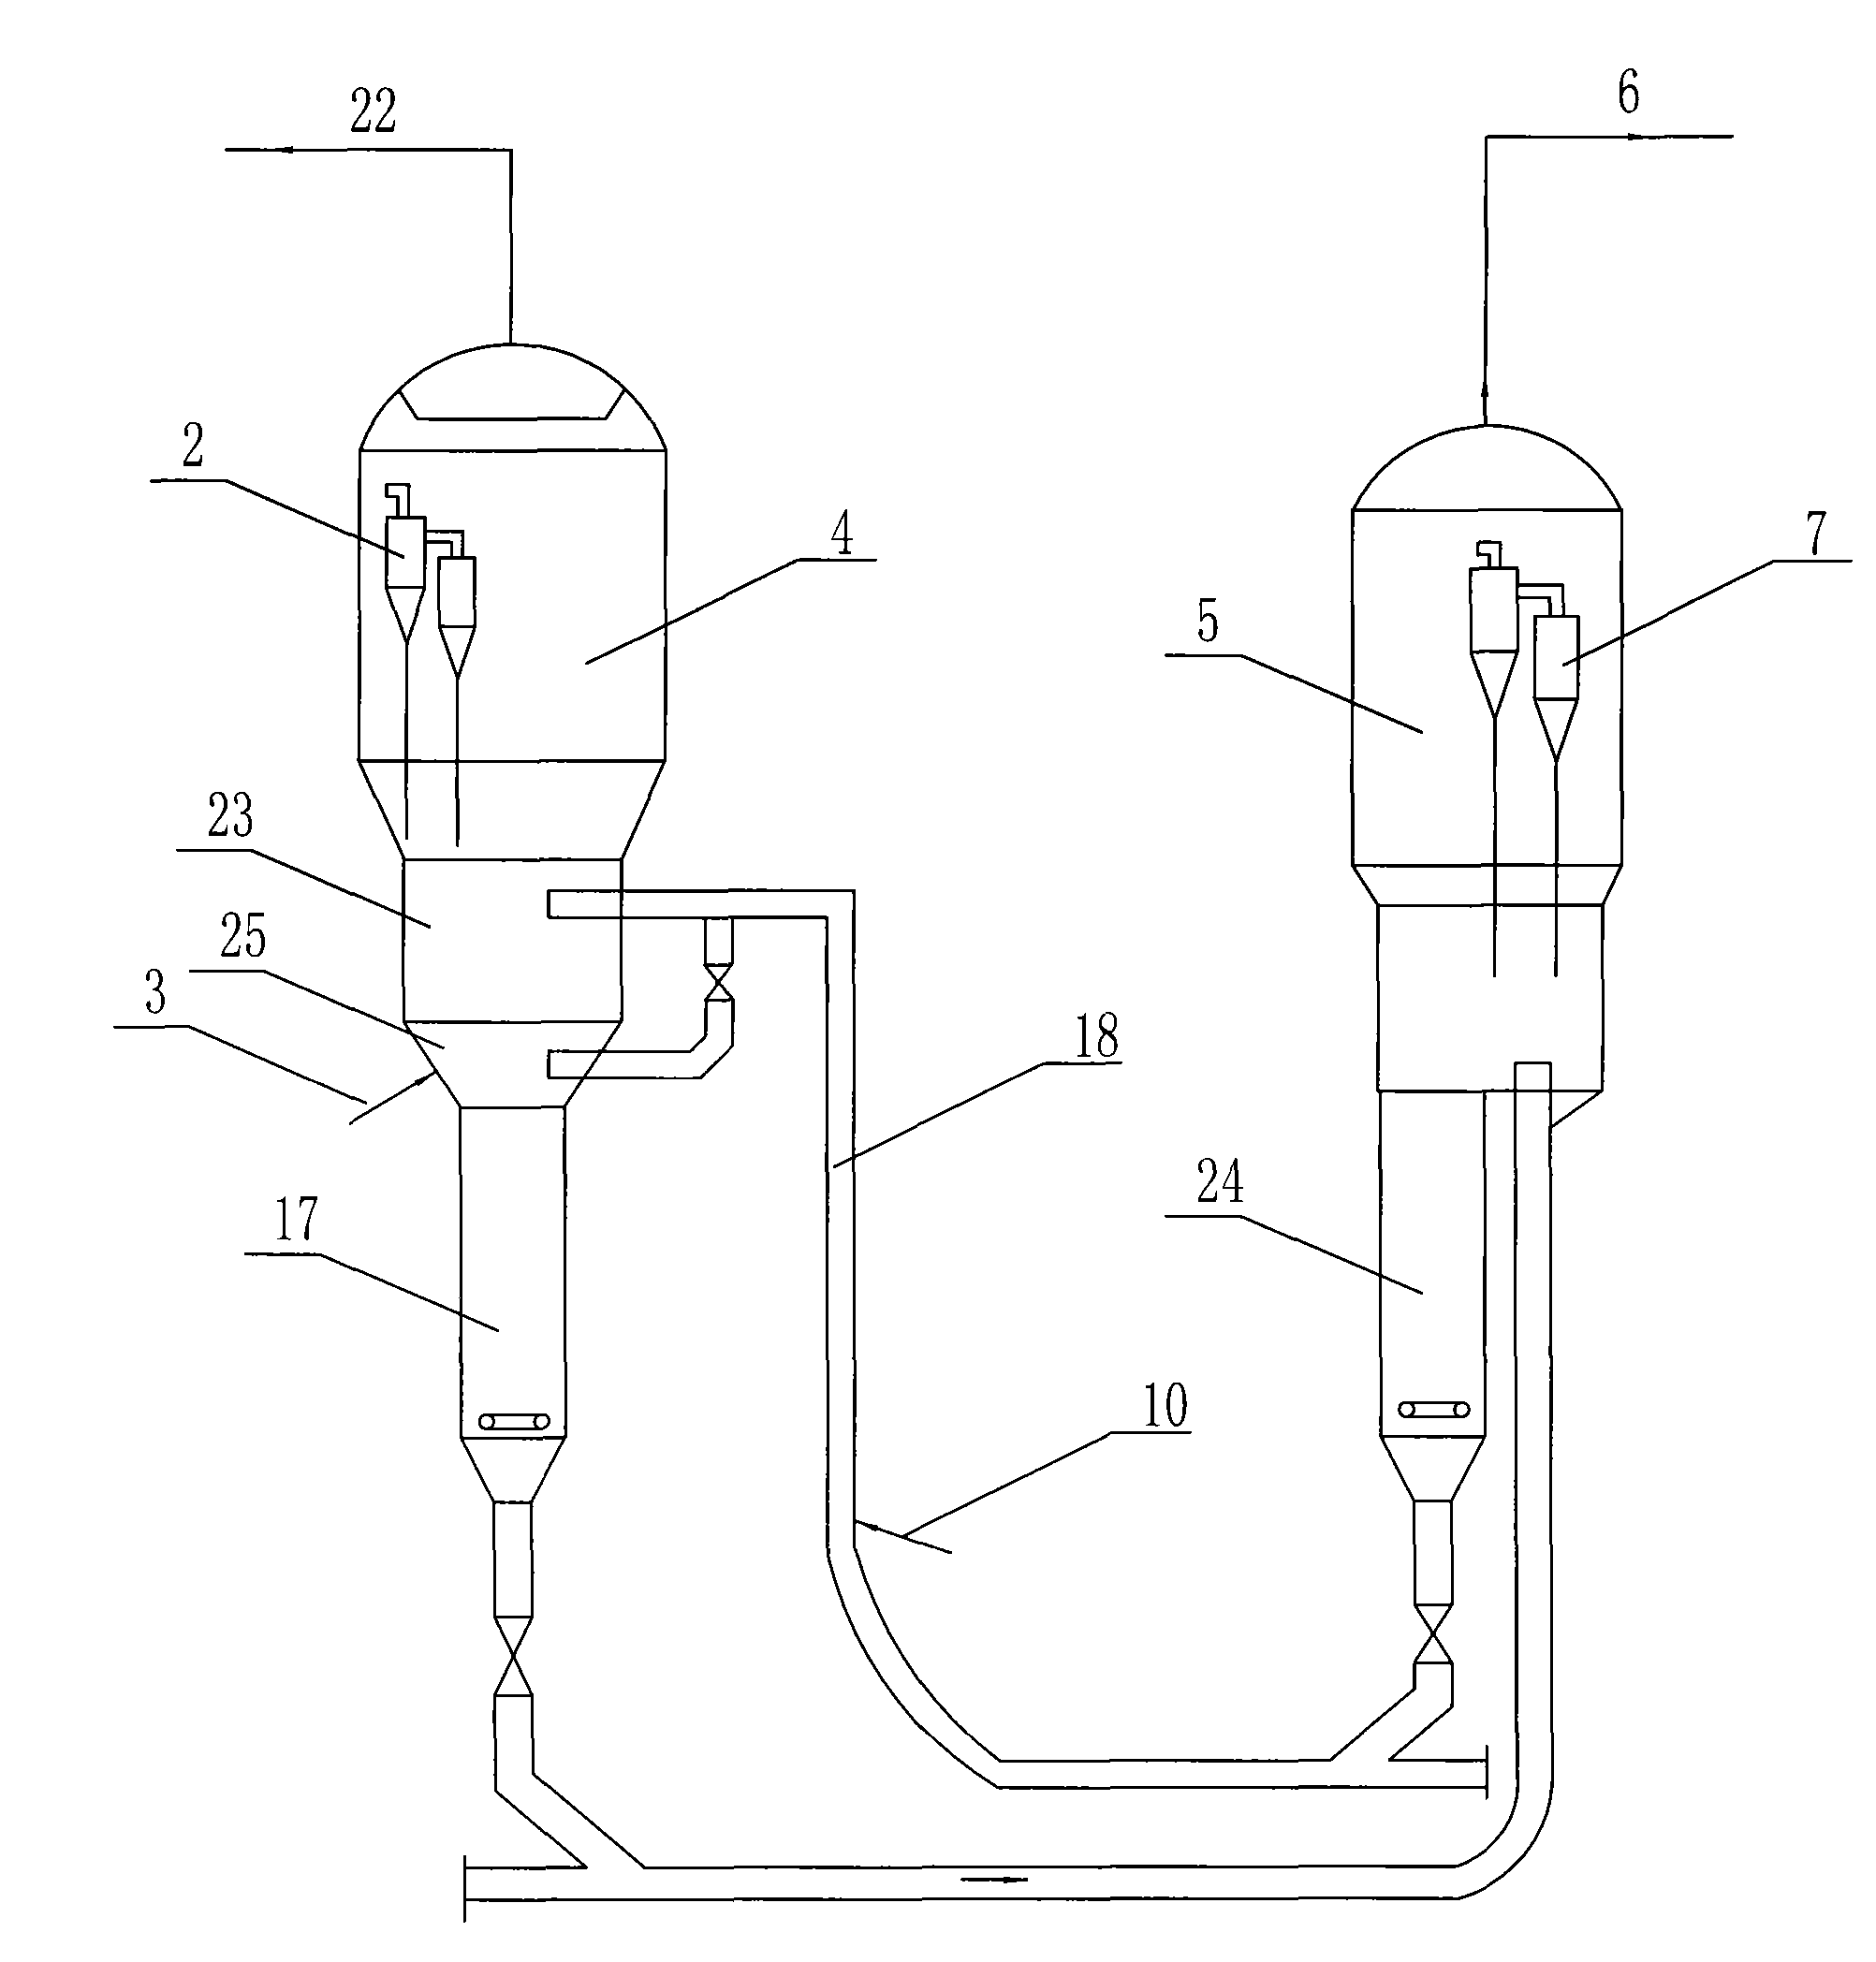 Conversion method of C4 and heavier components